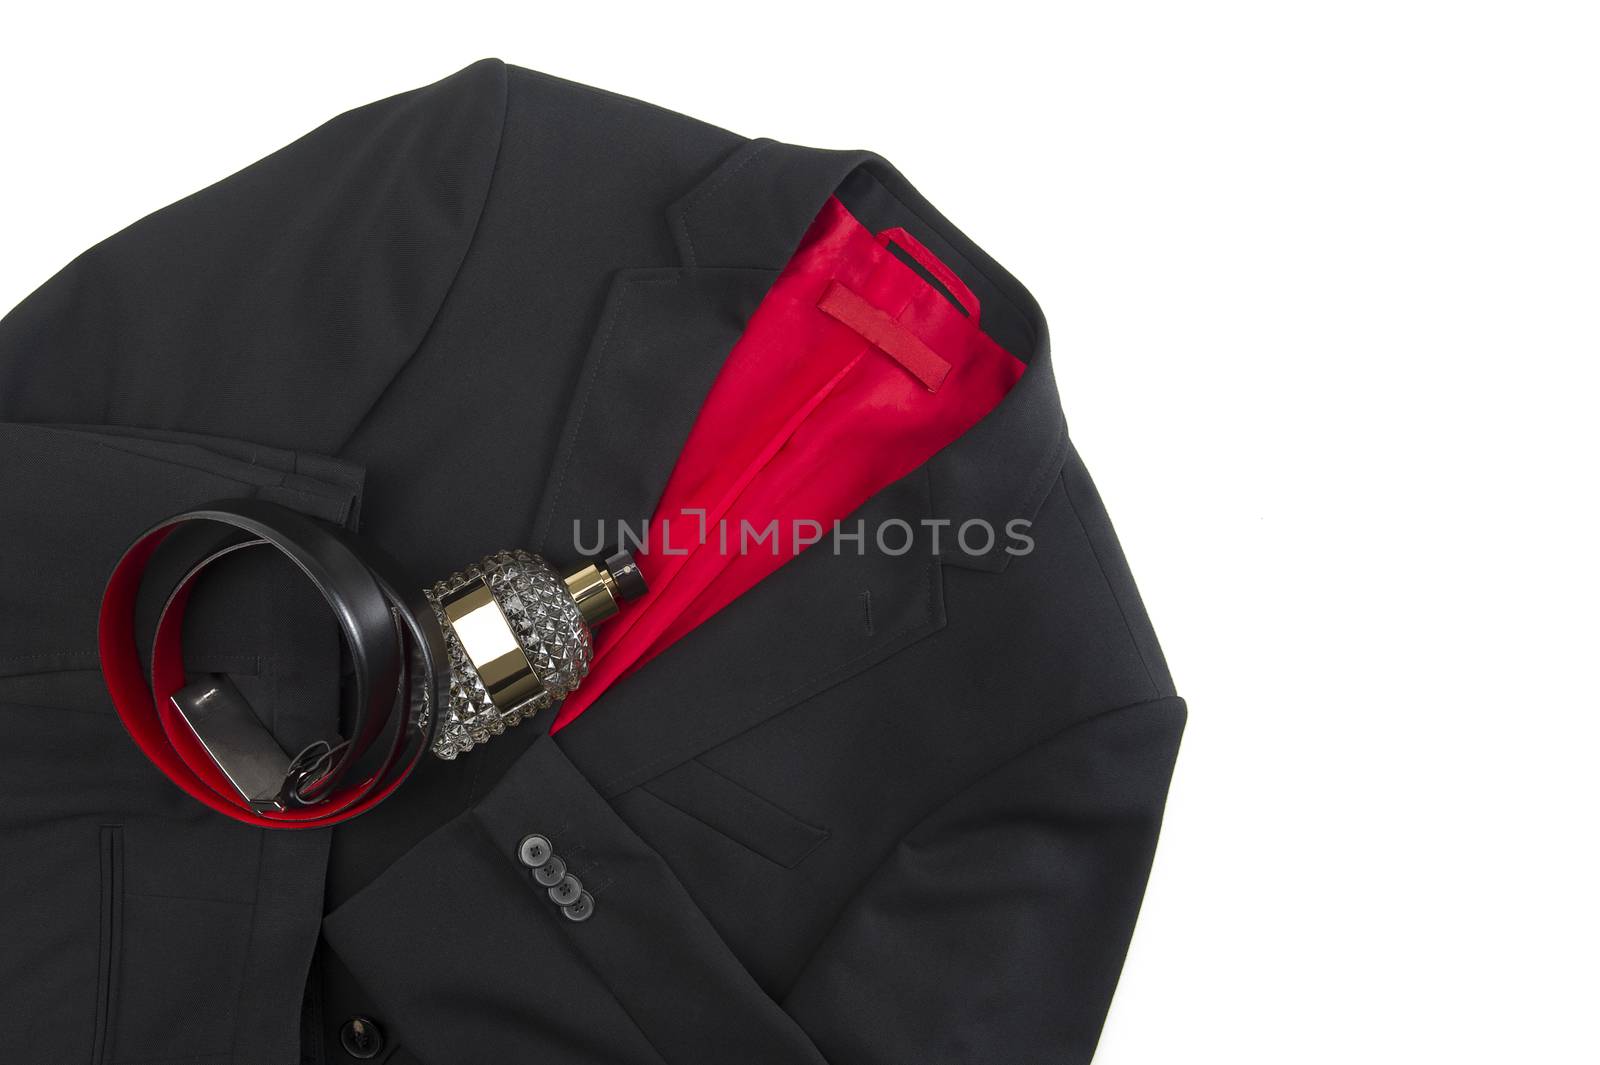 Stylish mens black or dark grey jacket with a colorful crimson lining and matching leather belt lying on a white background with a glass toiletry bottle, overhead view with copyspace